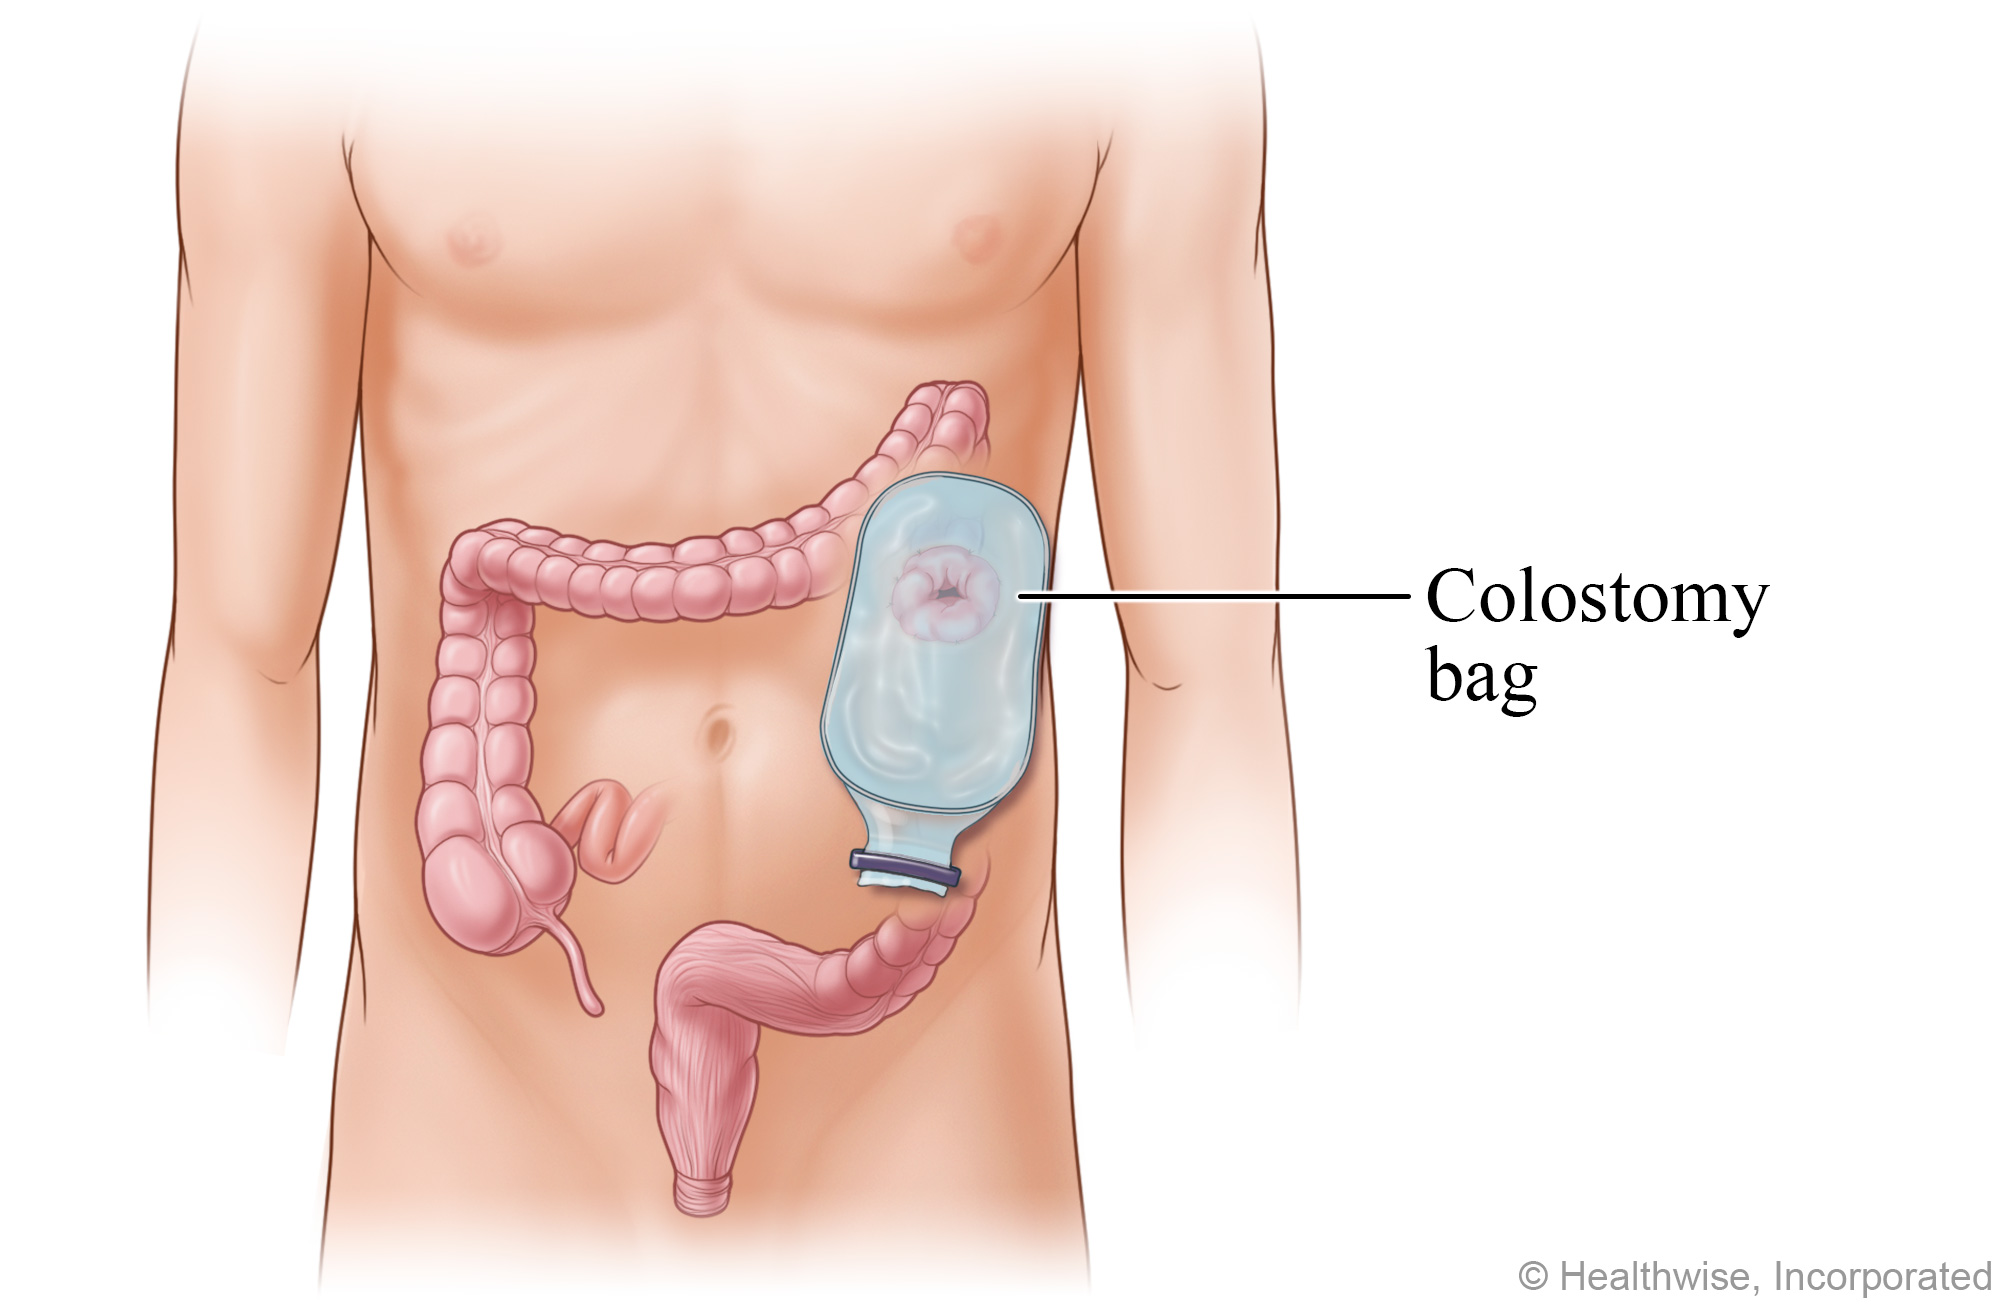 Colostomy pouch